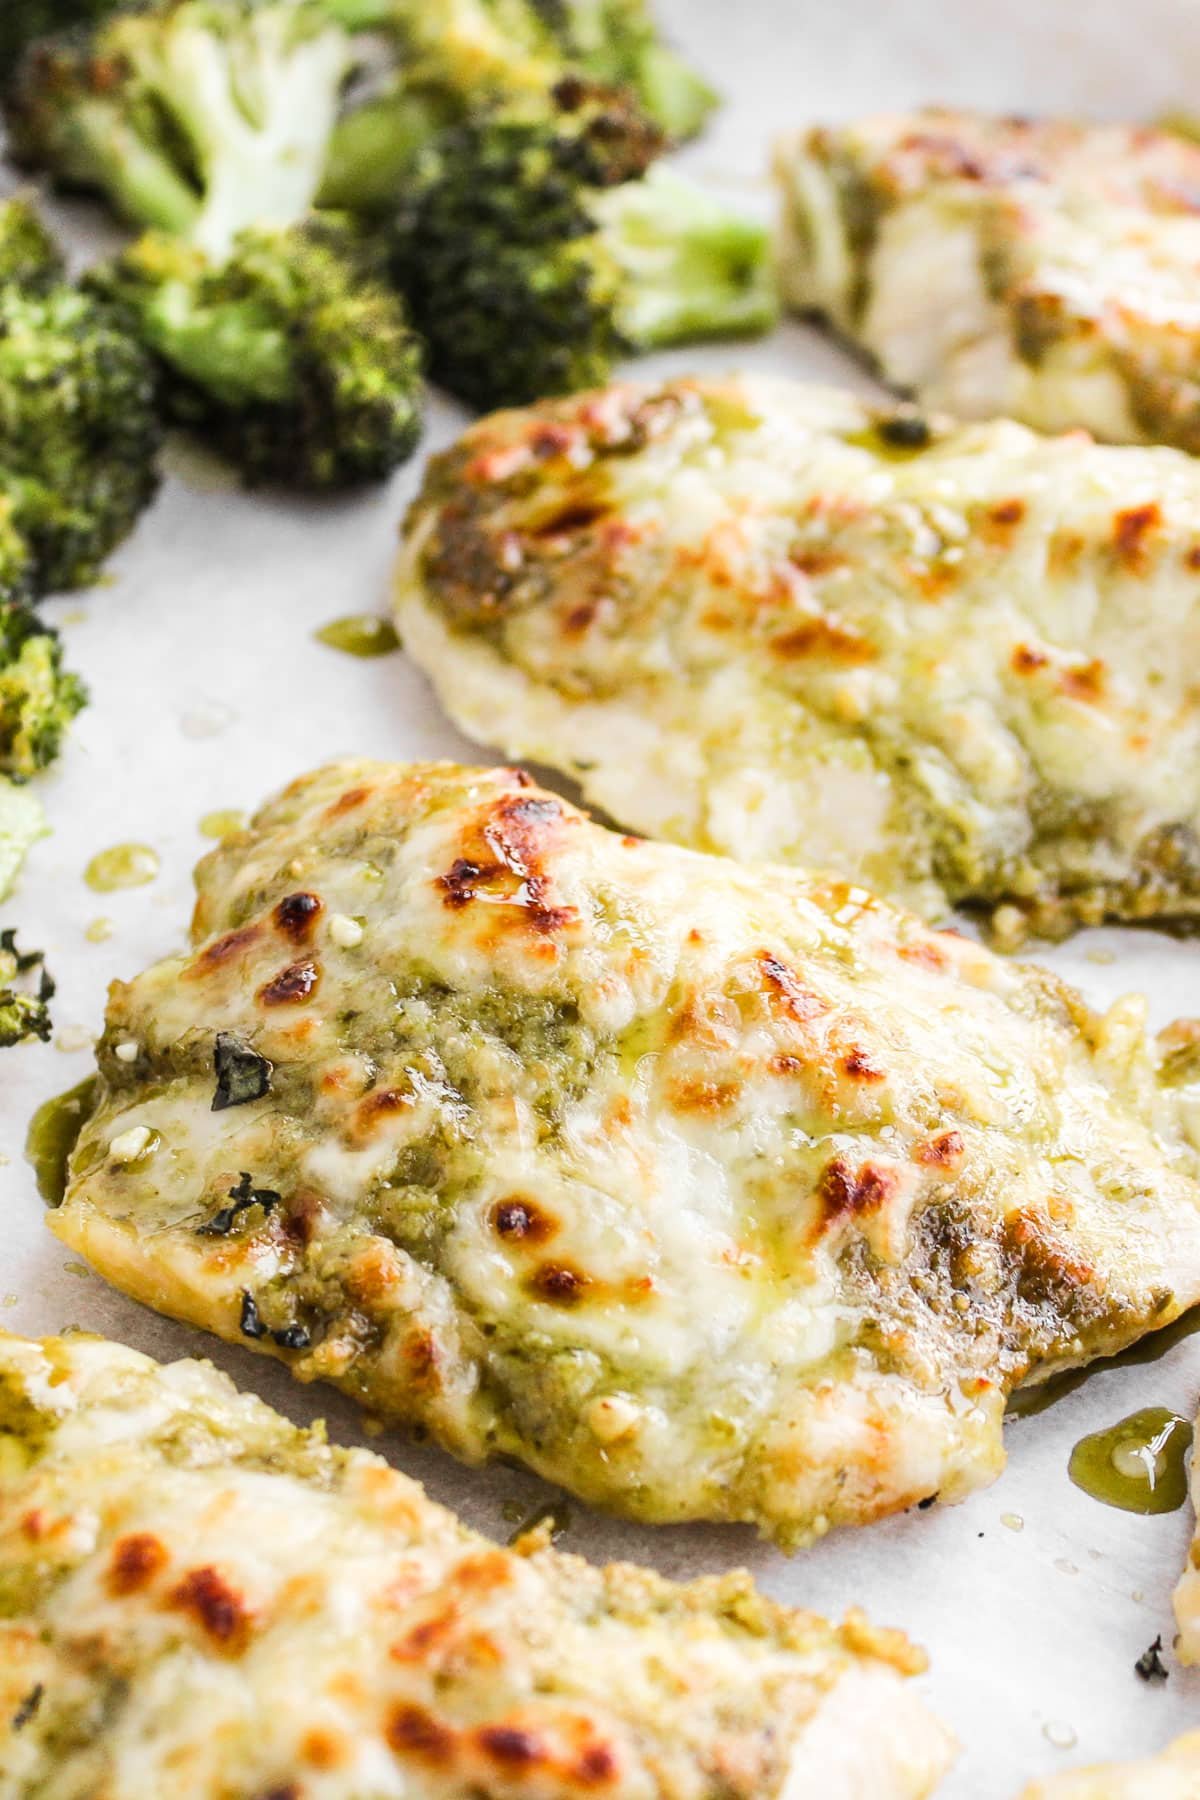 Pesto chicken baked on a sheet pan with broccoli